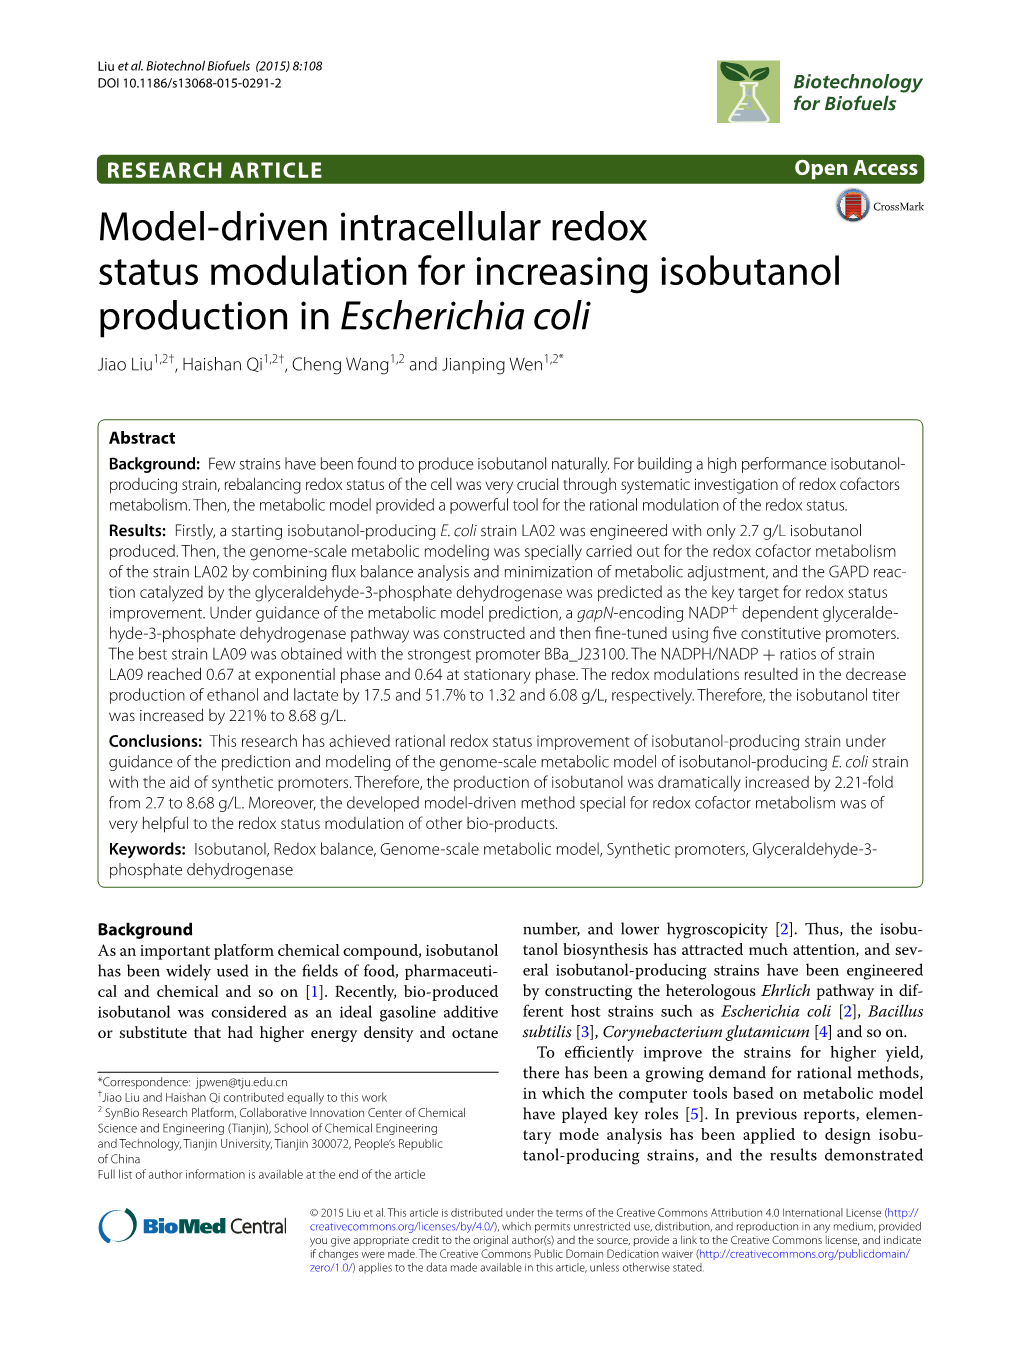 Model-Driven Intracellular Redox Status Modulation for Increasing